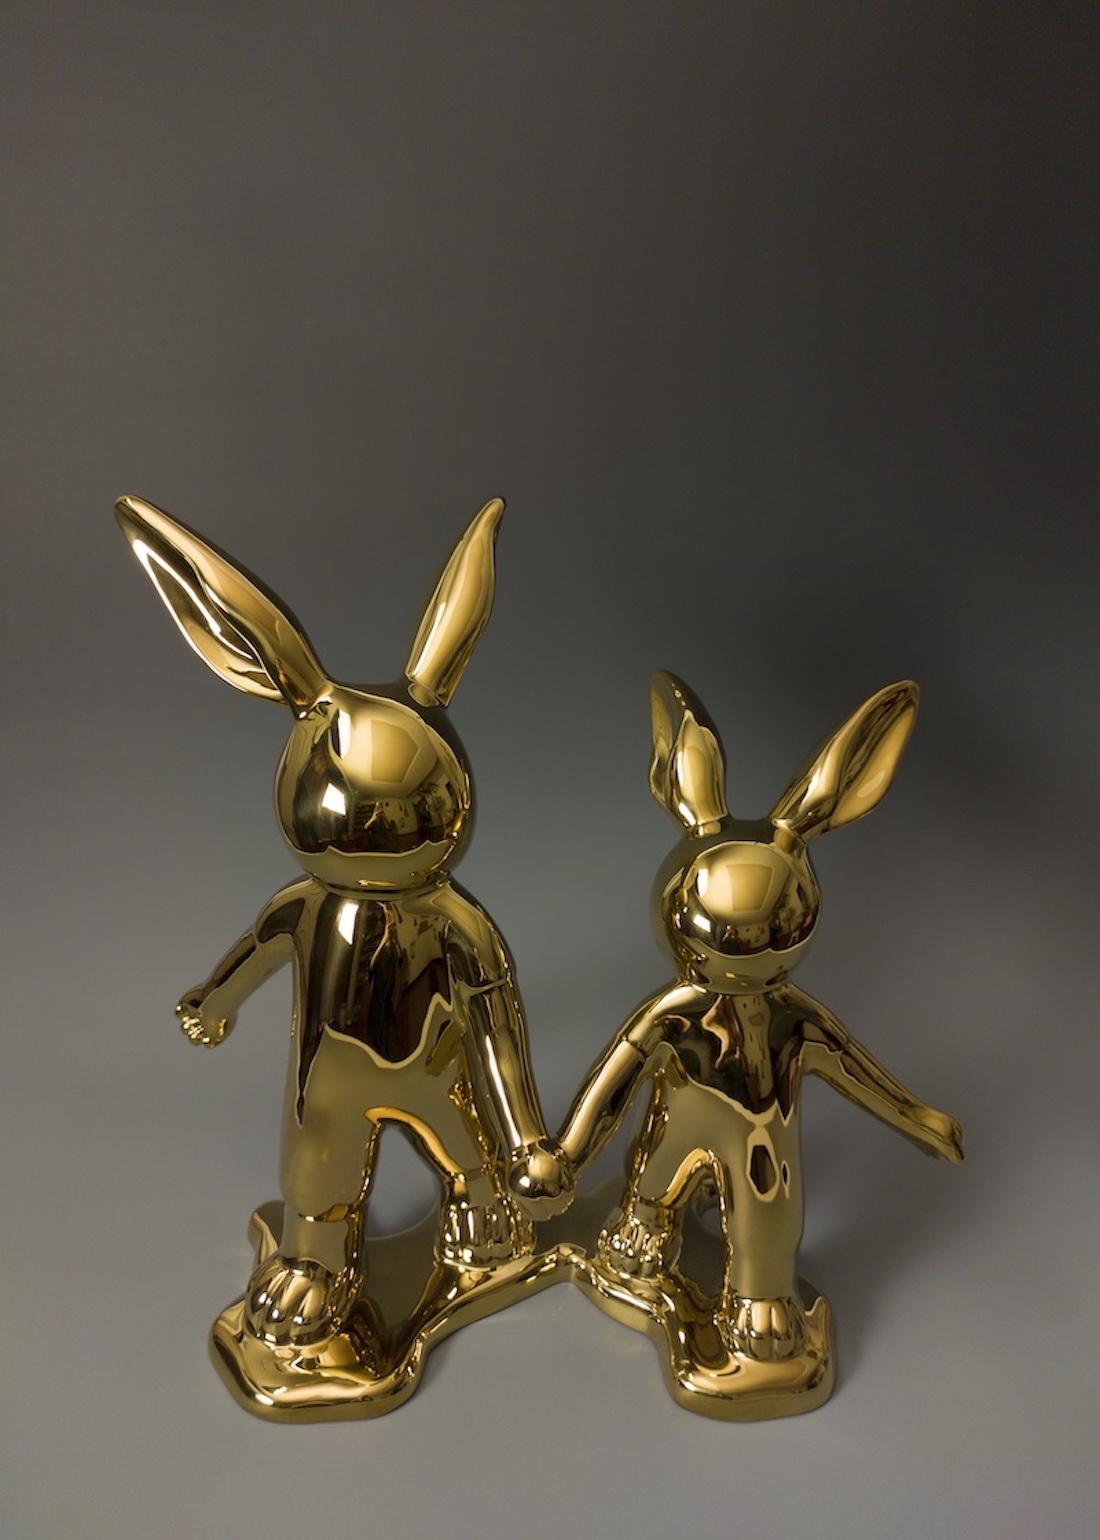 Artist name: Zhang Hui
Title: Gold Rabbit
Size: 48 x 46 x 28cm
Material: Stainless Steel
Year: 2020
Edition of 18 